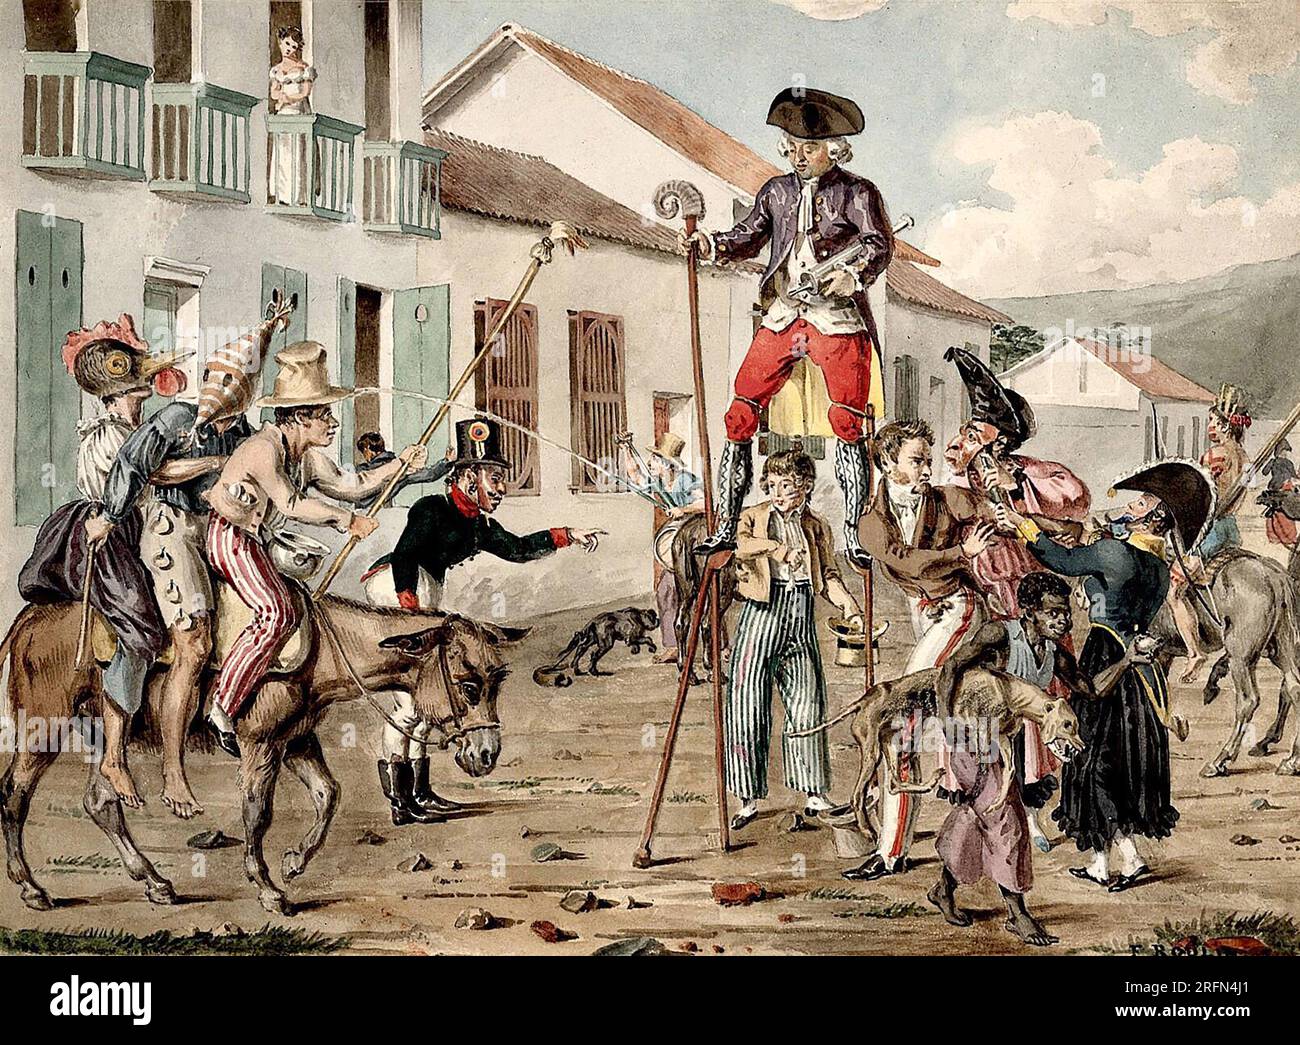 A street carnival in Bogota, Colombia, with a battle between personifications of medicine and disease. Watercolor by F. D. Roulin, circa 1822-1828. Stock Photo